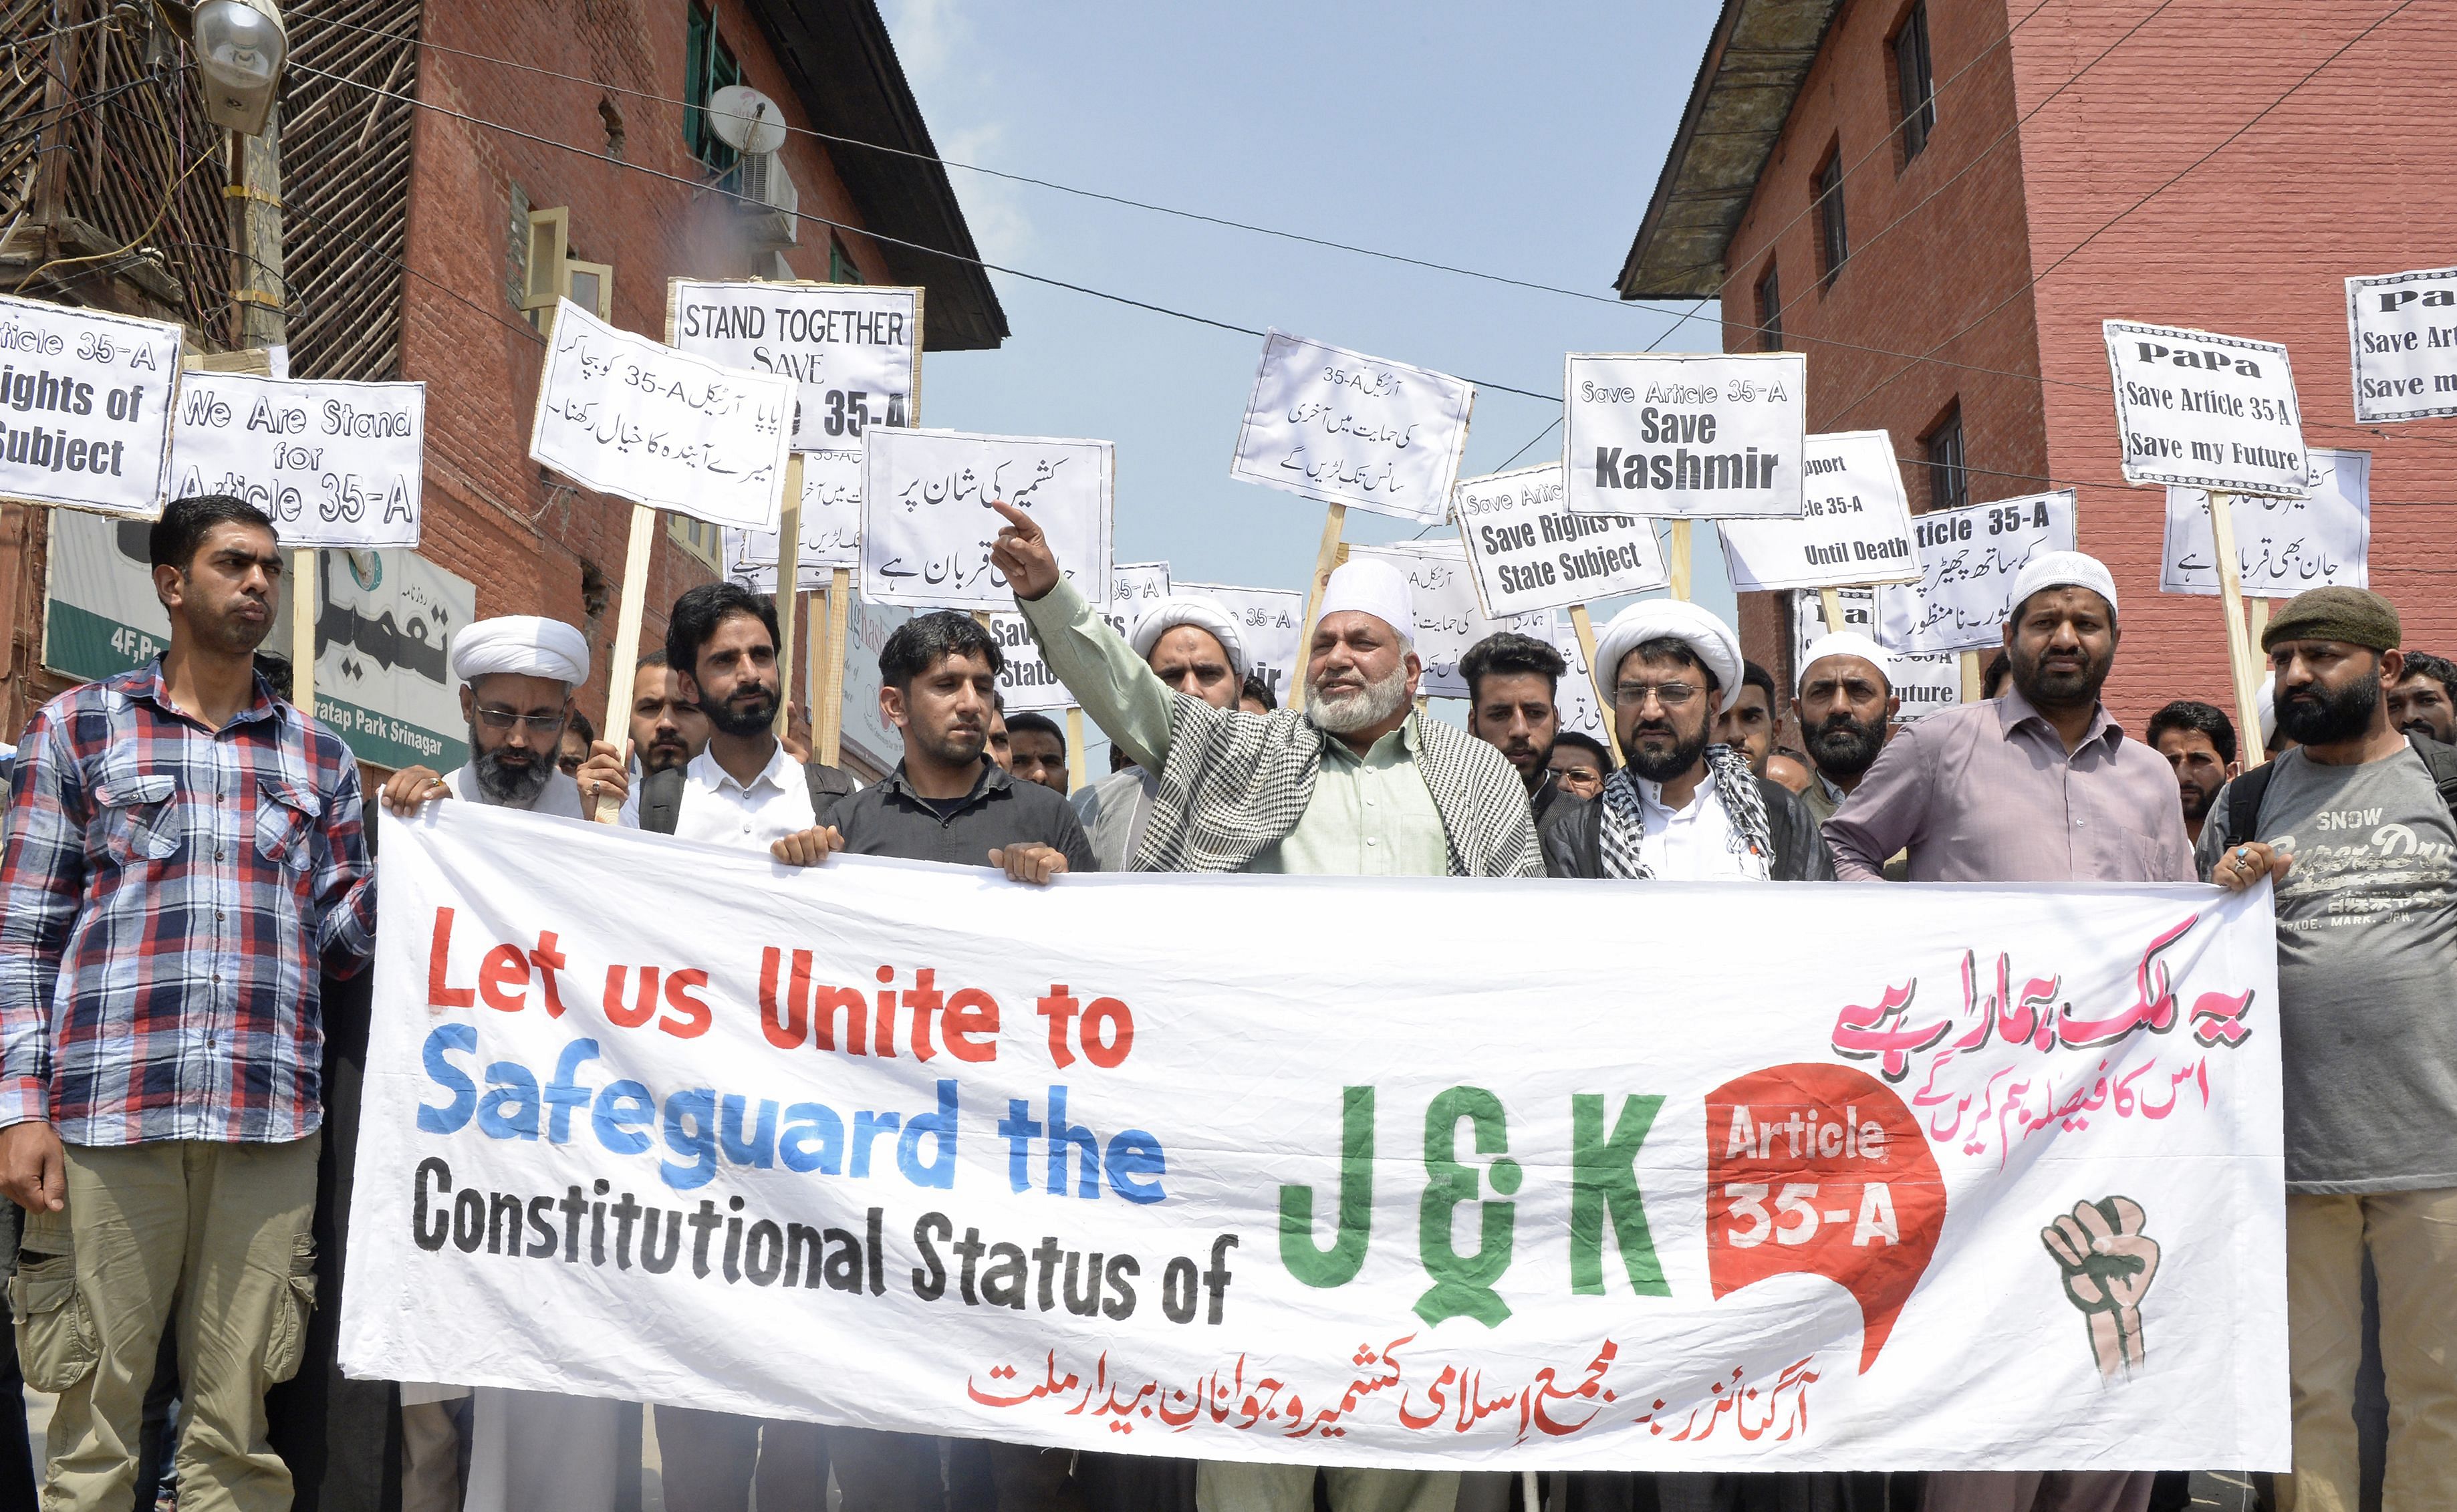 Kashmiri Shiite Muslims shout anti-India slogans during a demonstration against attempts by the NGO 'We the Citizens' and individual citizens to revoke article 35A and 370, in Srinagar on August 24, 2018. (AFP File Photo)